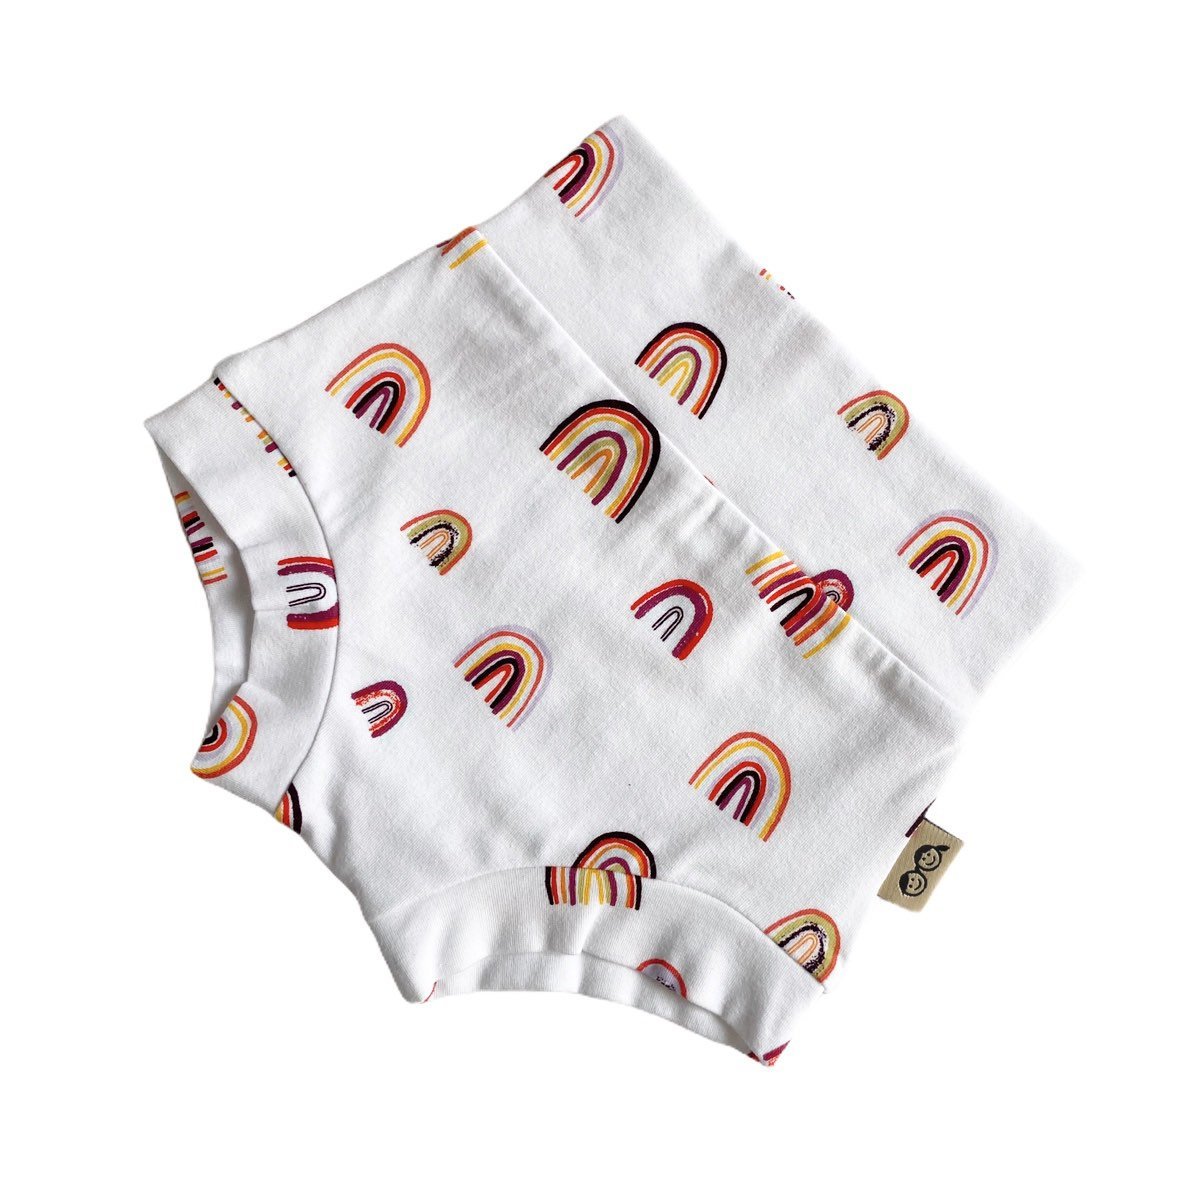 Rainbows on White Bummies and/or Headbands